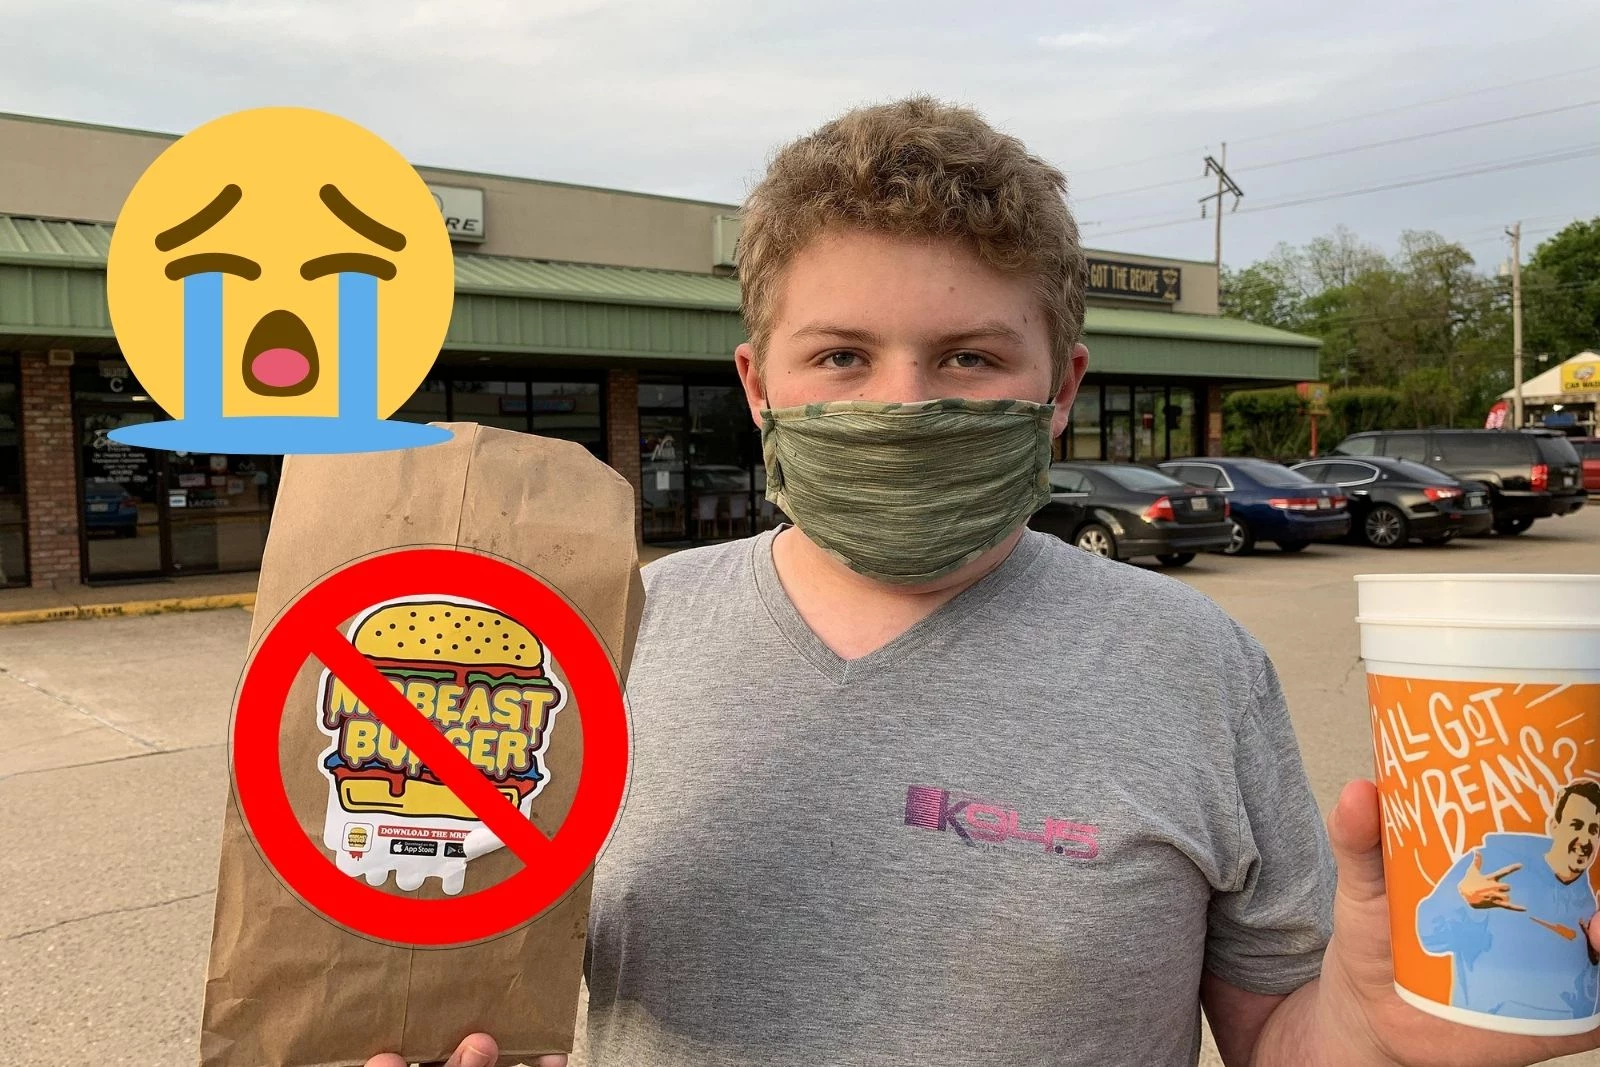 MrBeast Burger now available in Longview, Local